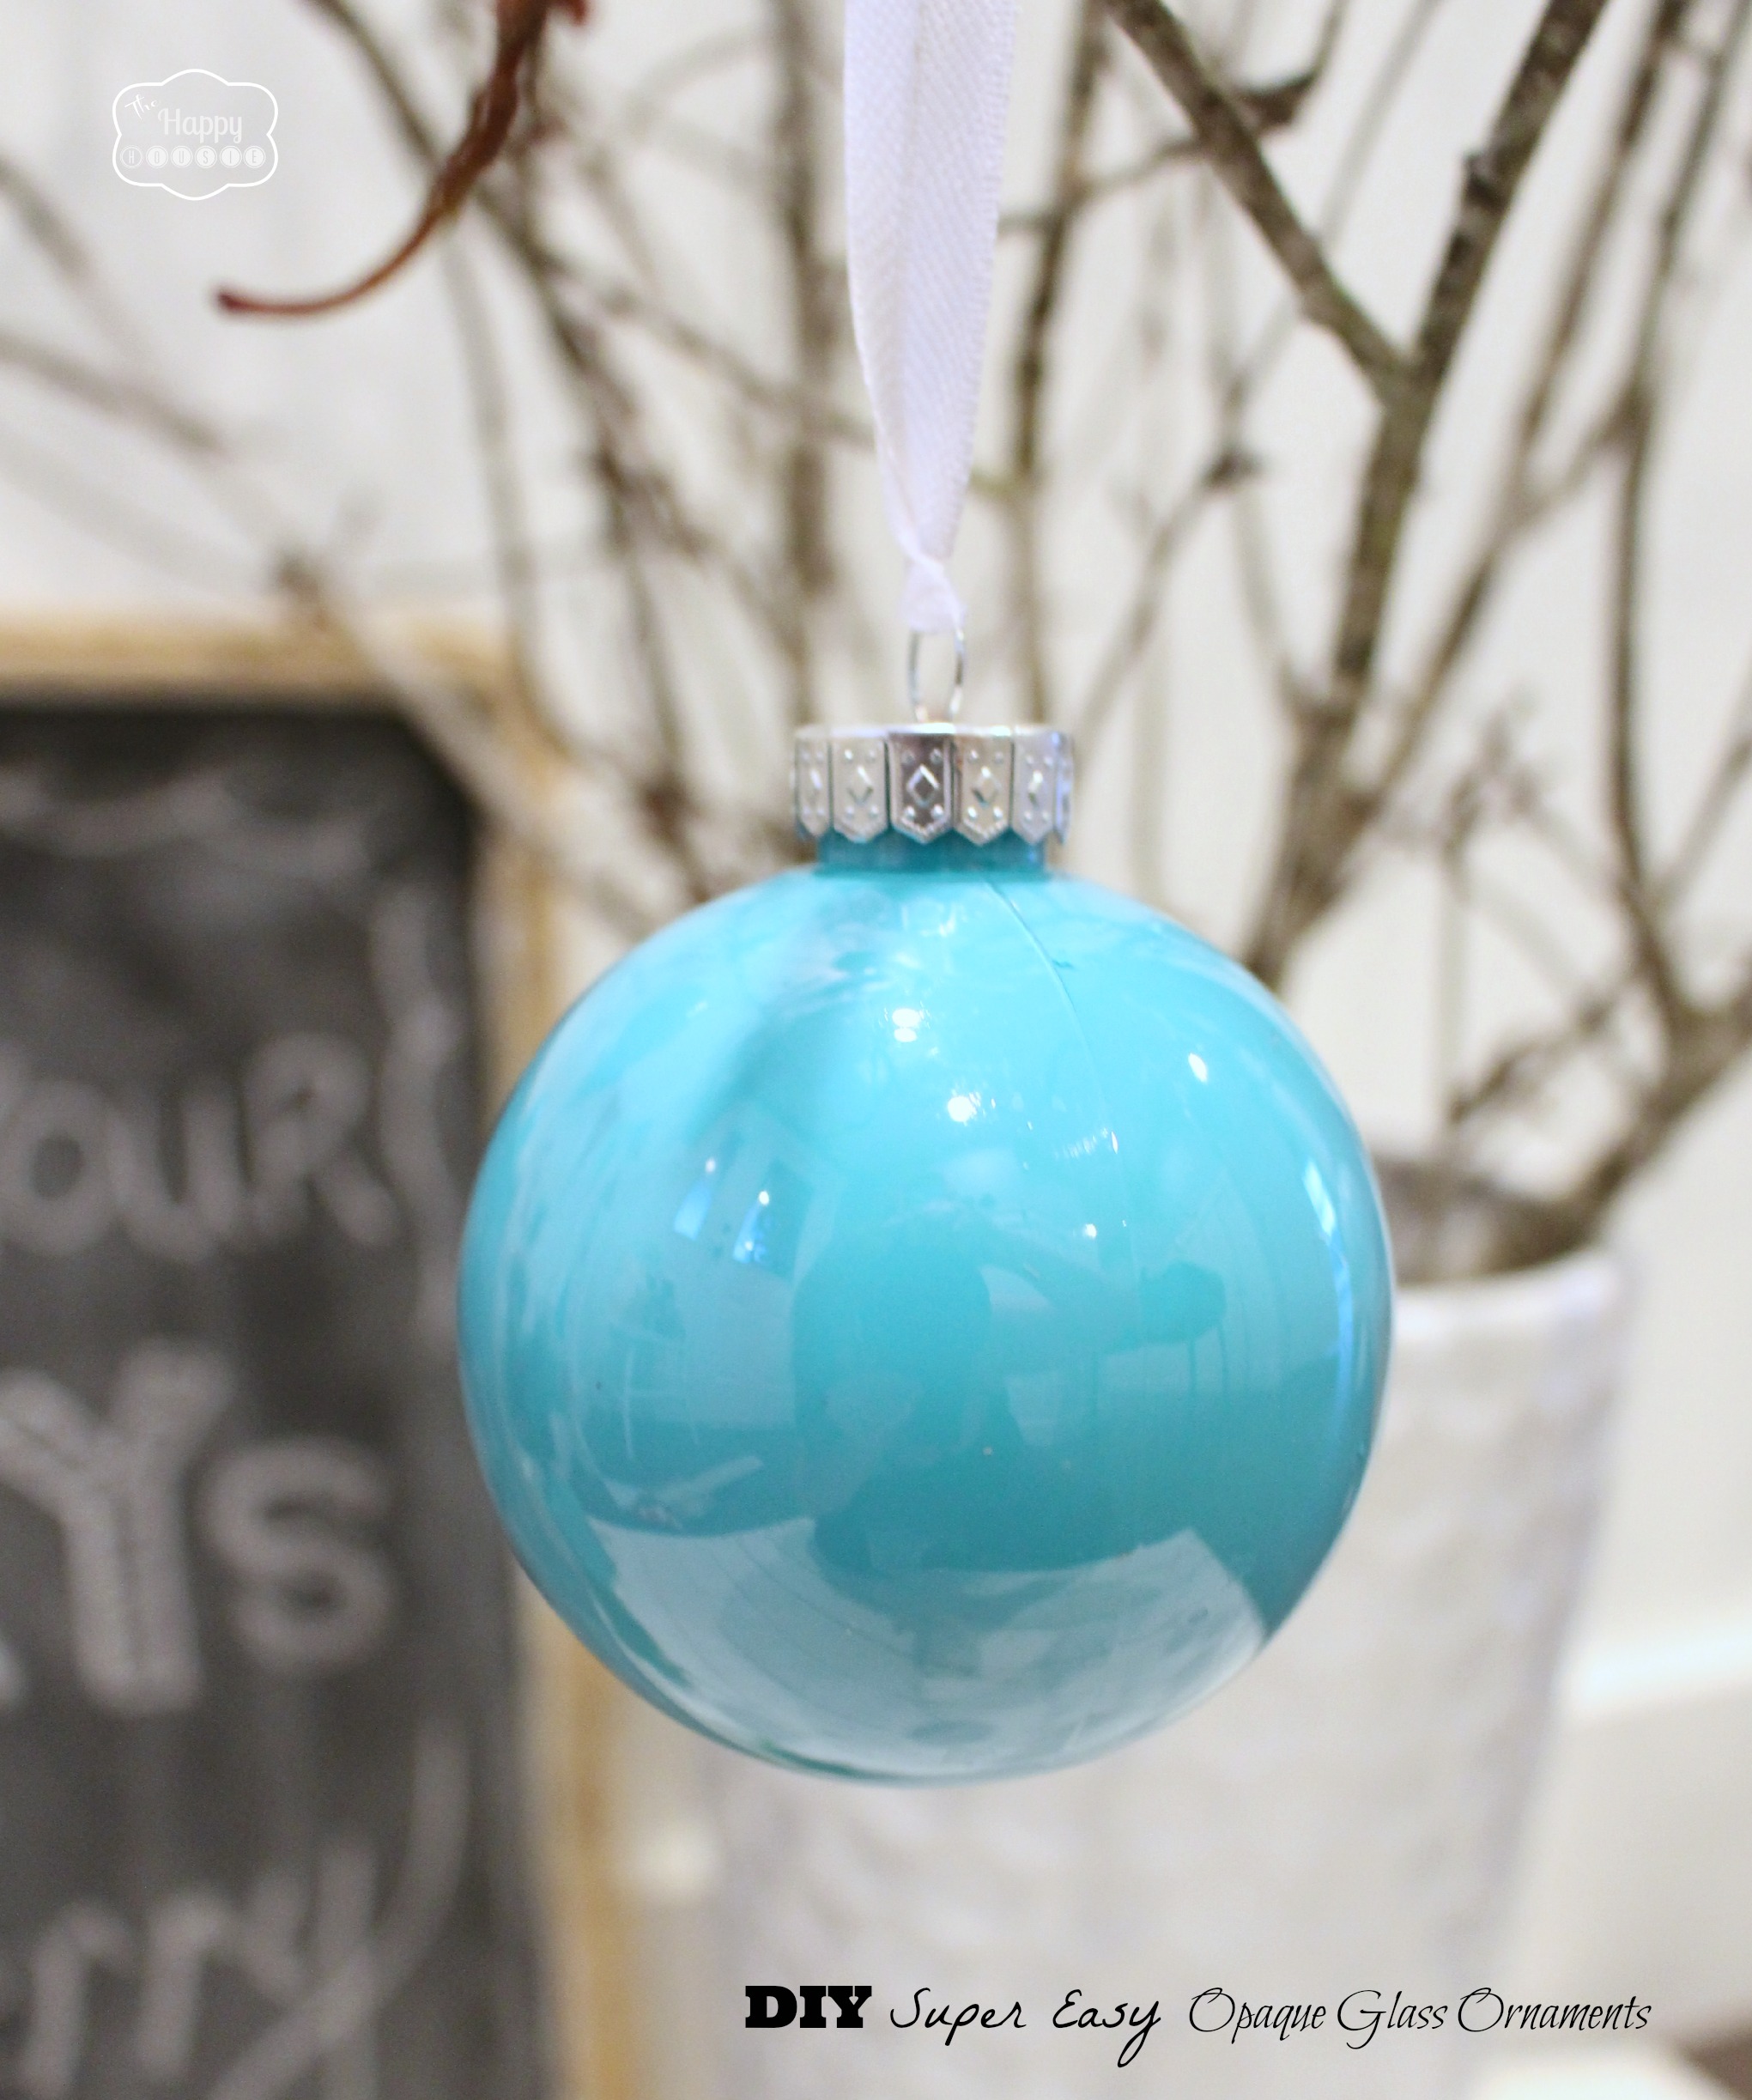 20 Elegantly Adorable Ways To Fill Clear Ornaments The Happy Housie